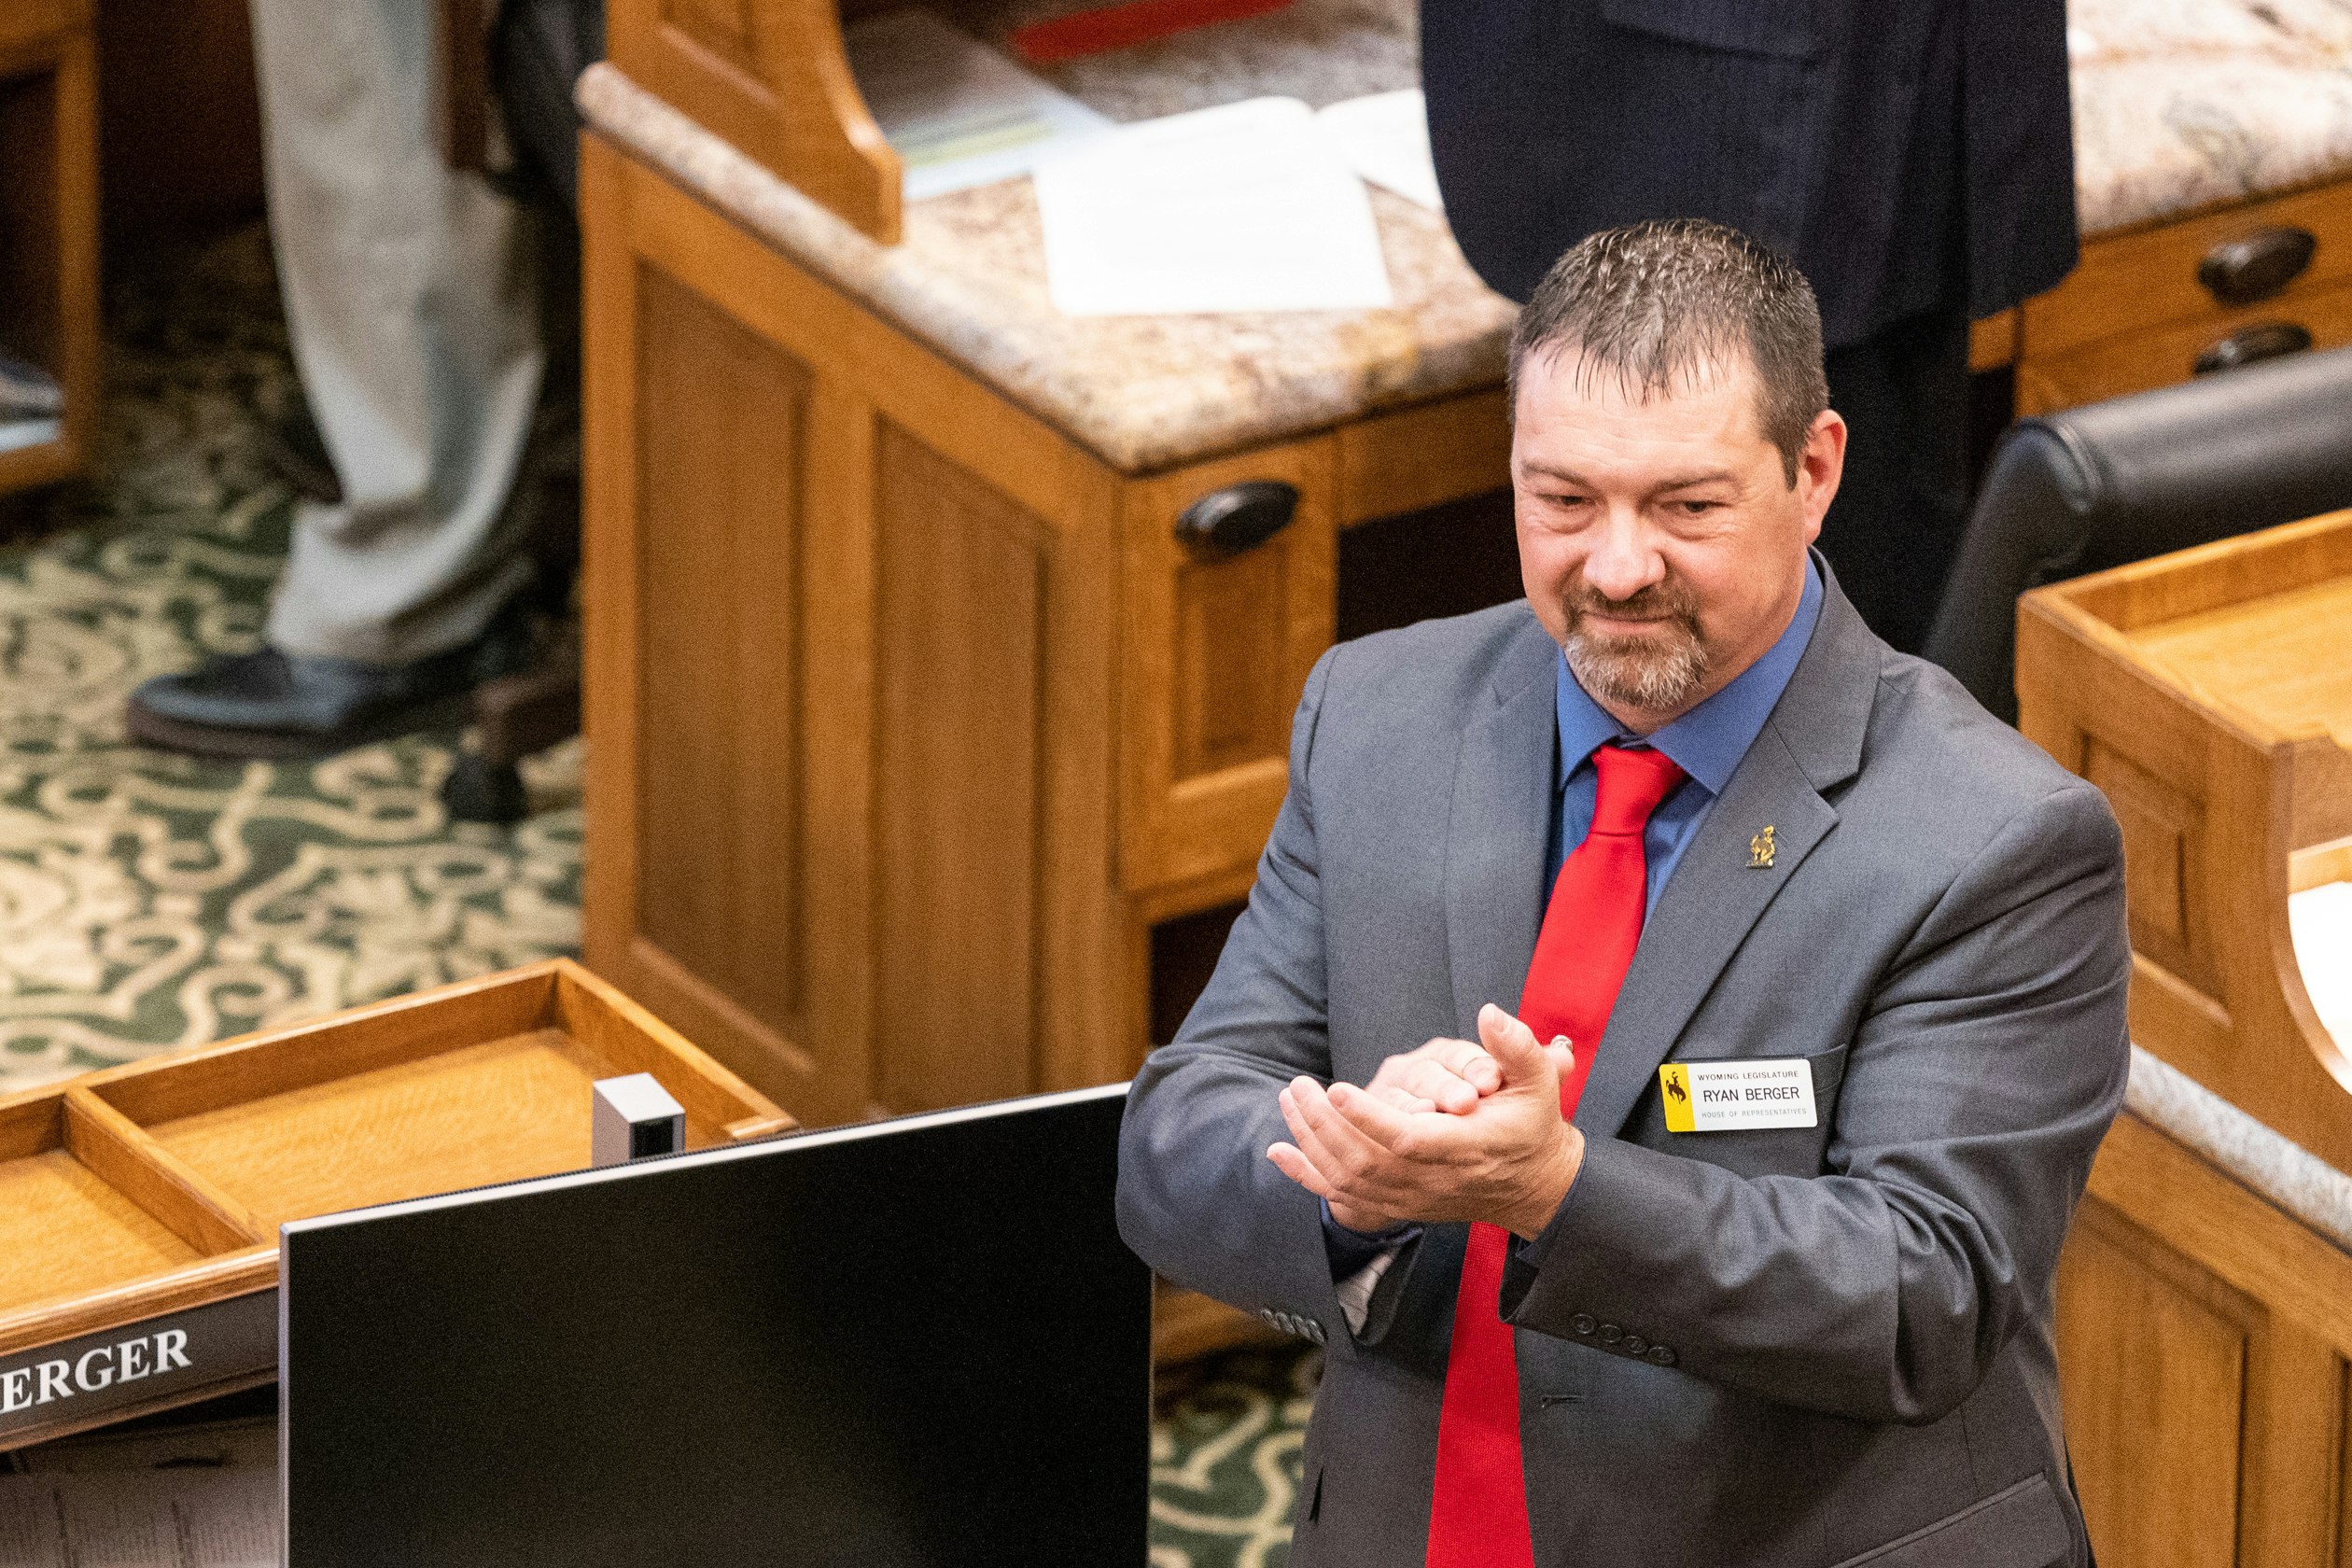 State Rep. Ryan Berger, R-Evanston, is proposing the Legislature consider a bill that would allow undocumented residents who graduate from Wyoming high schools to be eligible for in-state tuition to state colleges.